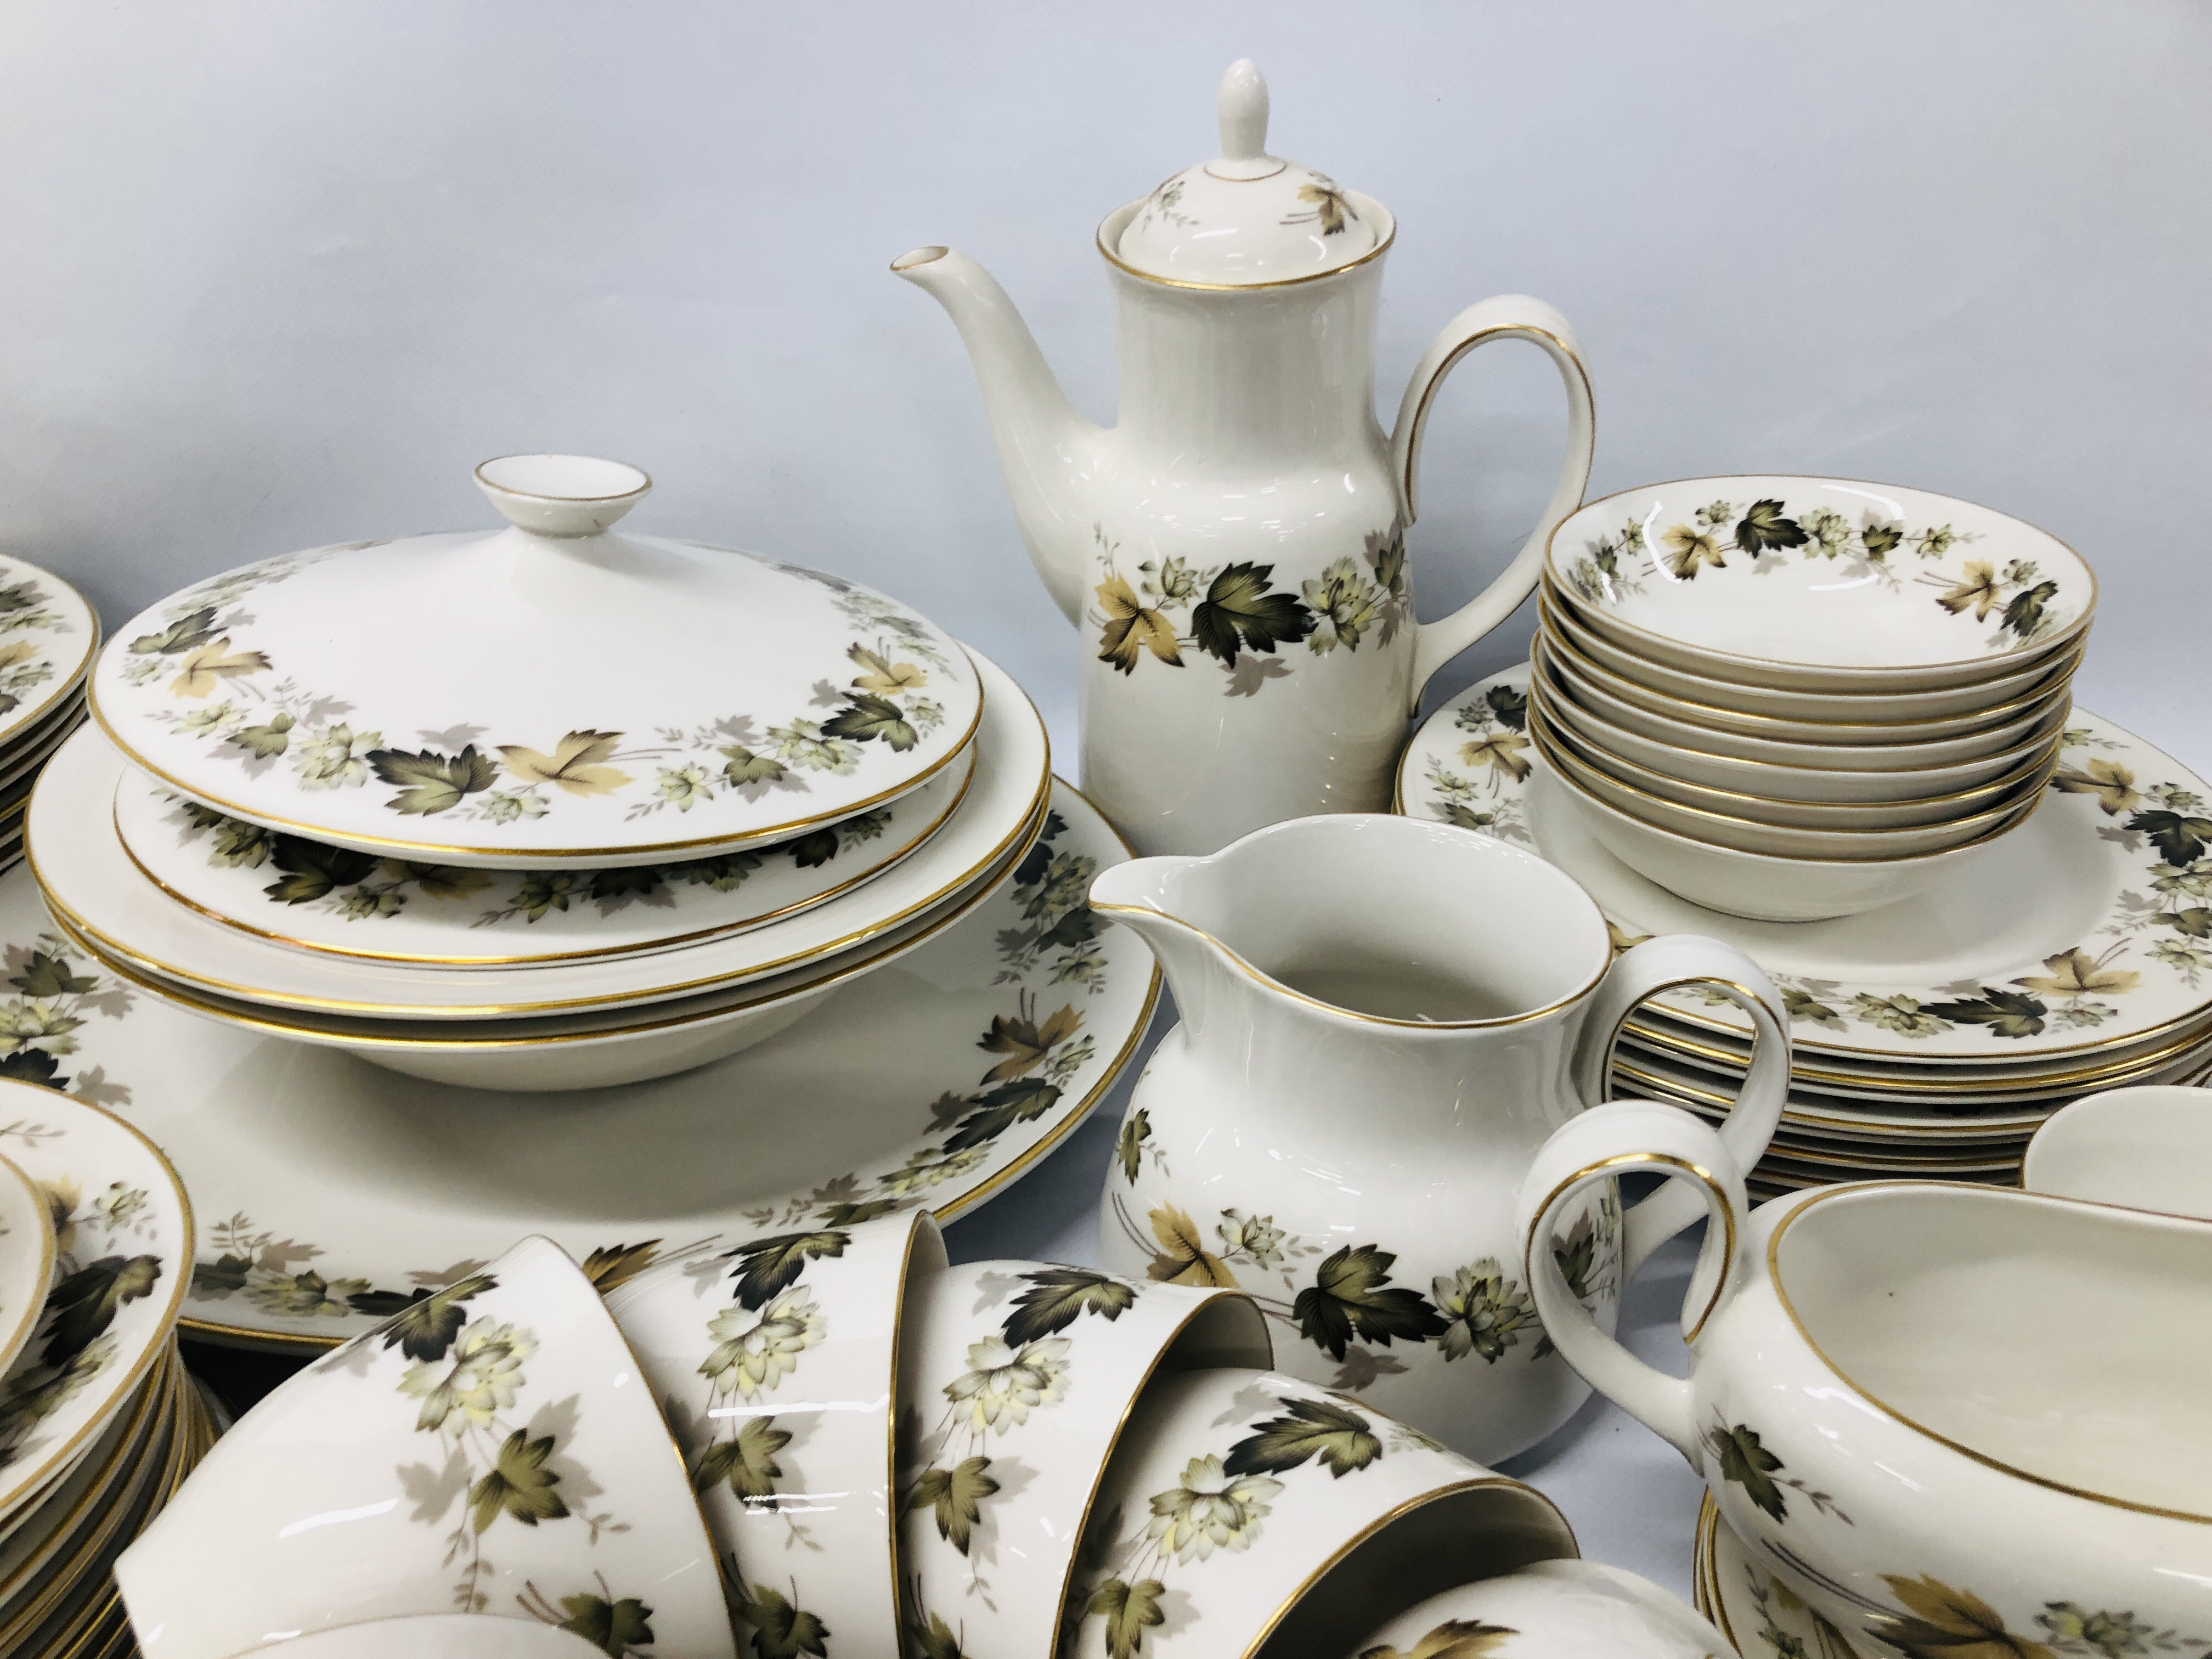 COLLECTION OF ROYAL DOULTON "LARCHMONT" TC1019 TEA AND DINNER WARE (APPROX. - Image 5 of 9